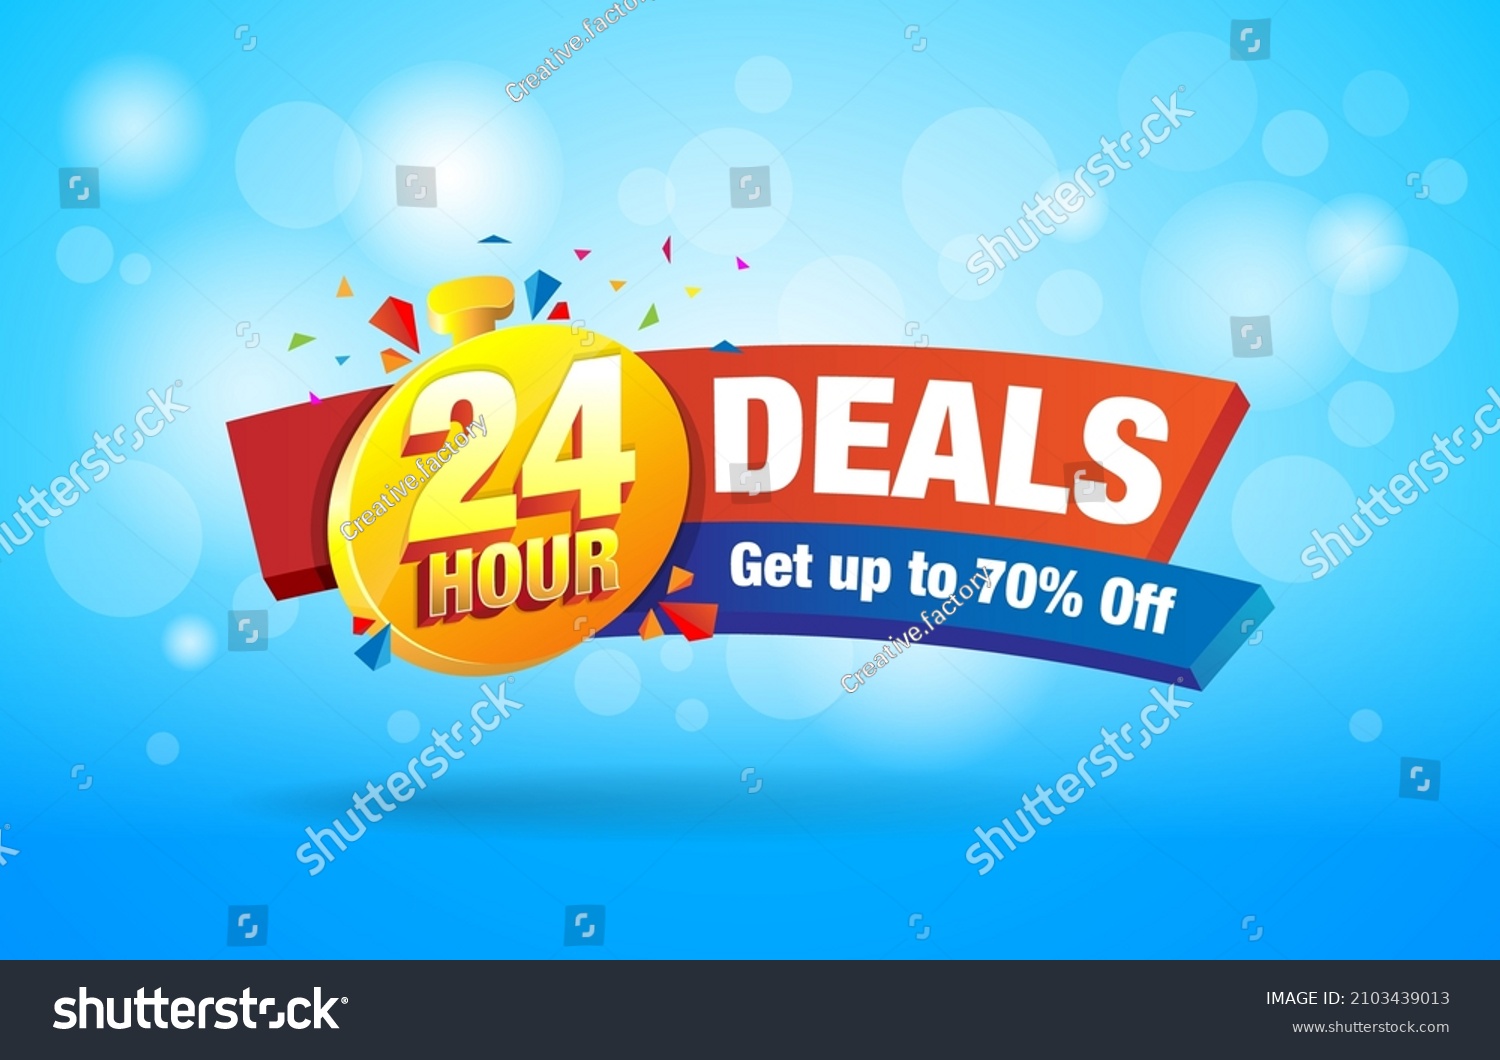 SVG of 24 Hour deals get upto 70% Off for hourly based campaign. 24 deals or sales promo template. svg